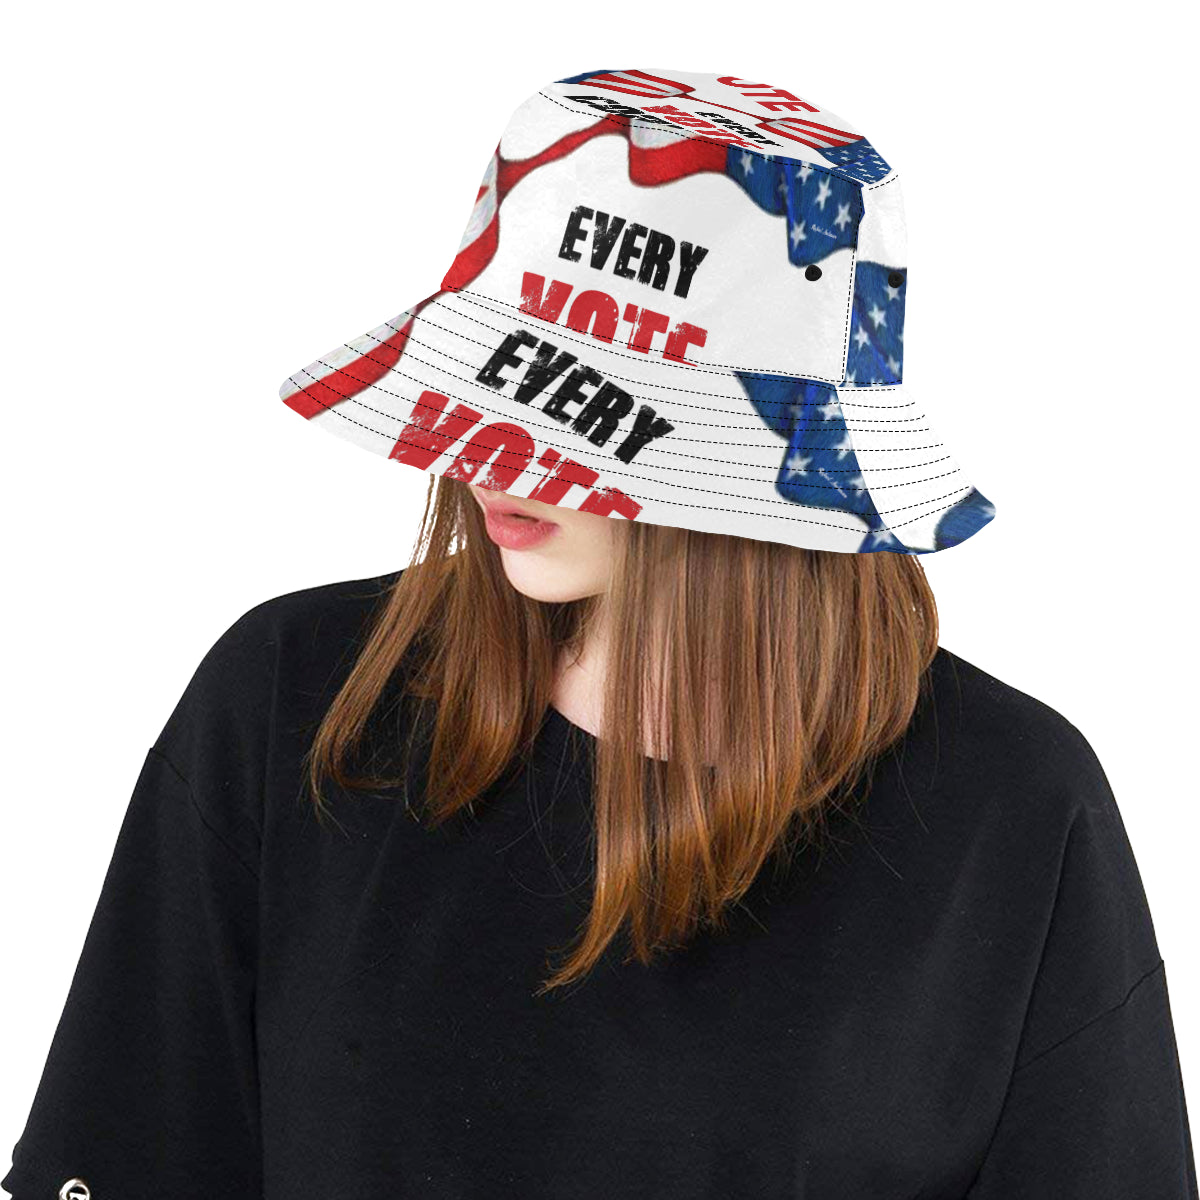 Elections USA 2020 All Over Print Bucket Hat